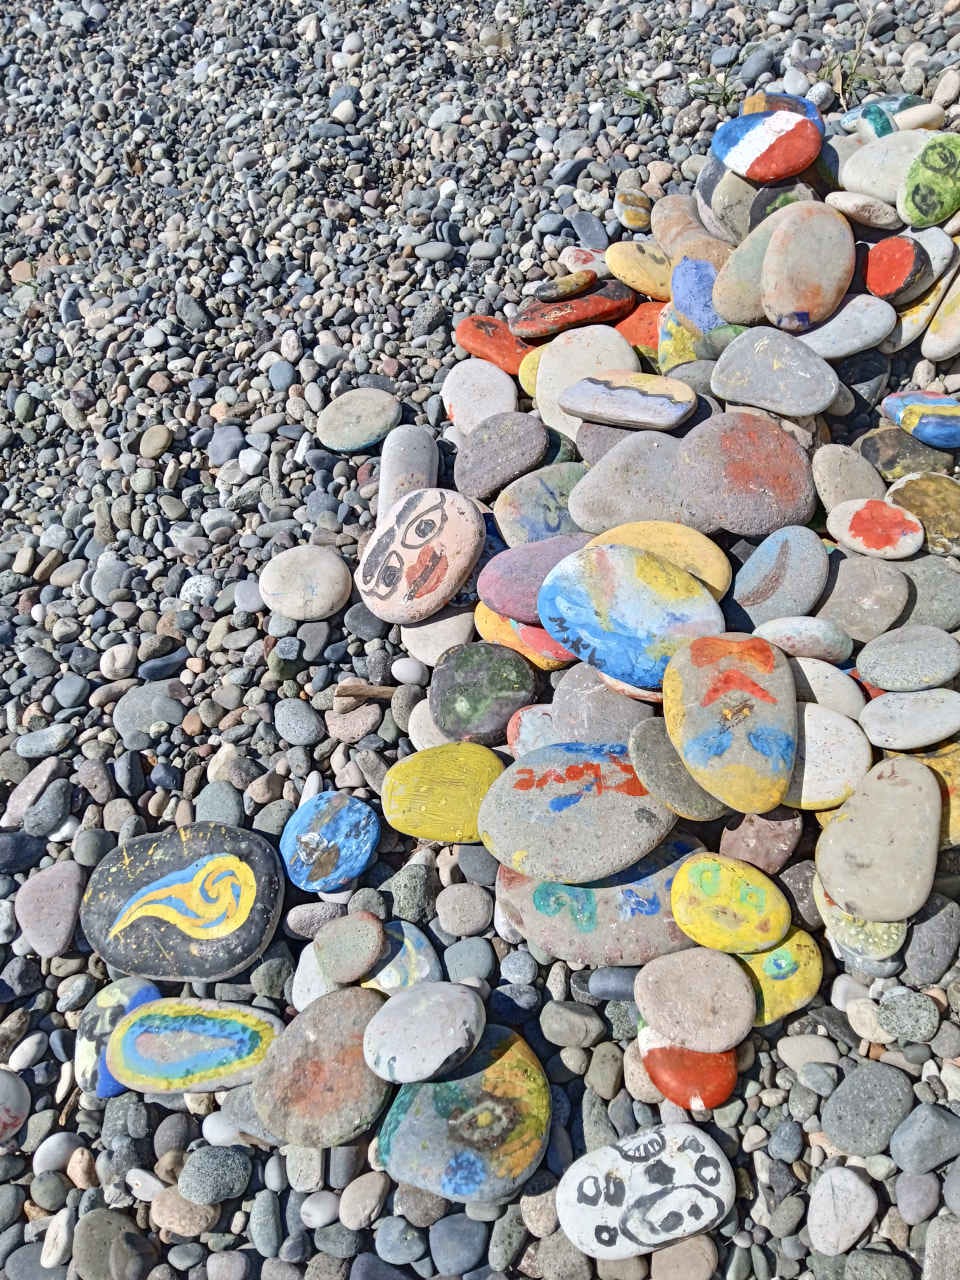 This is a special art in Georgia — painting on pebbles and beach stones.